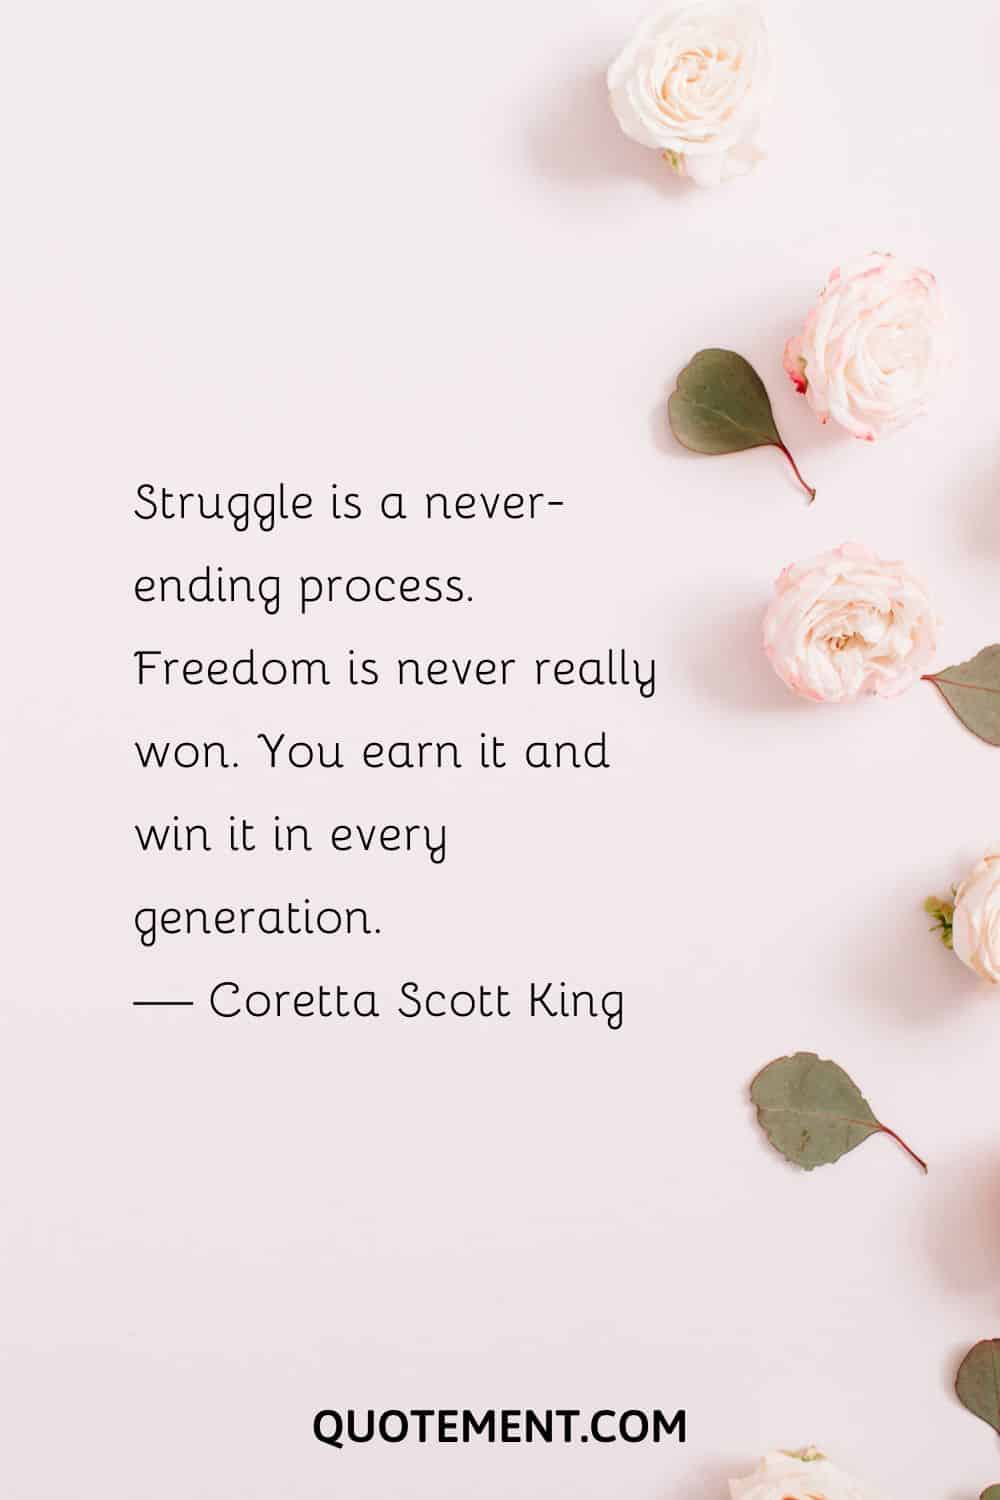 Struggle is a never-ending process.